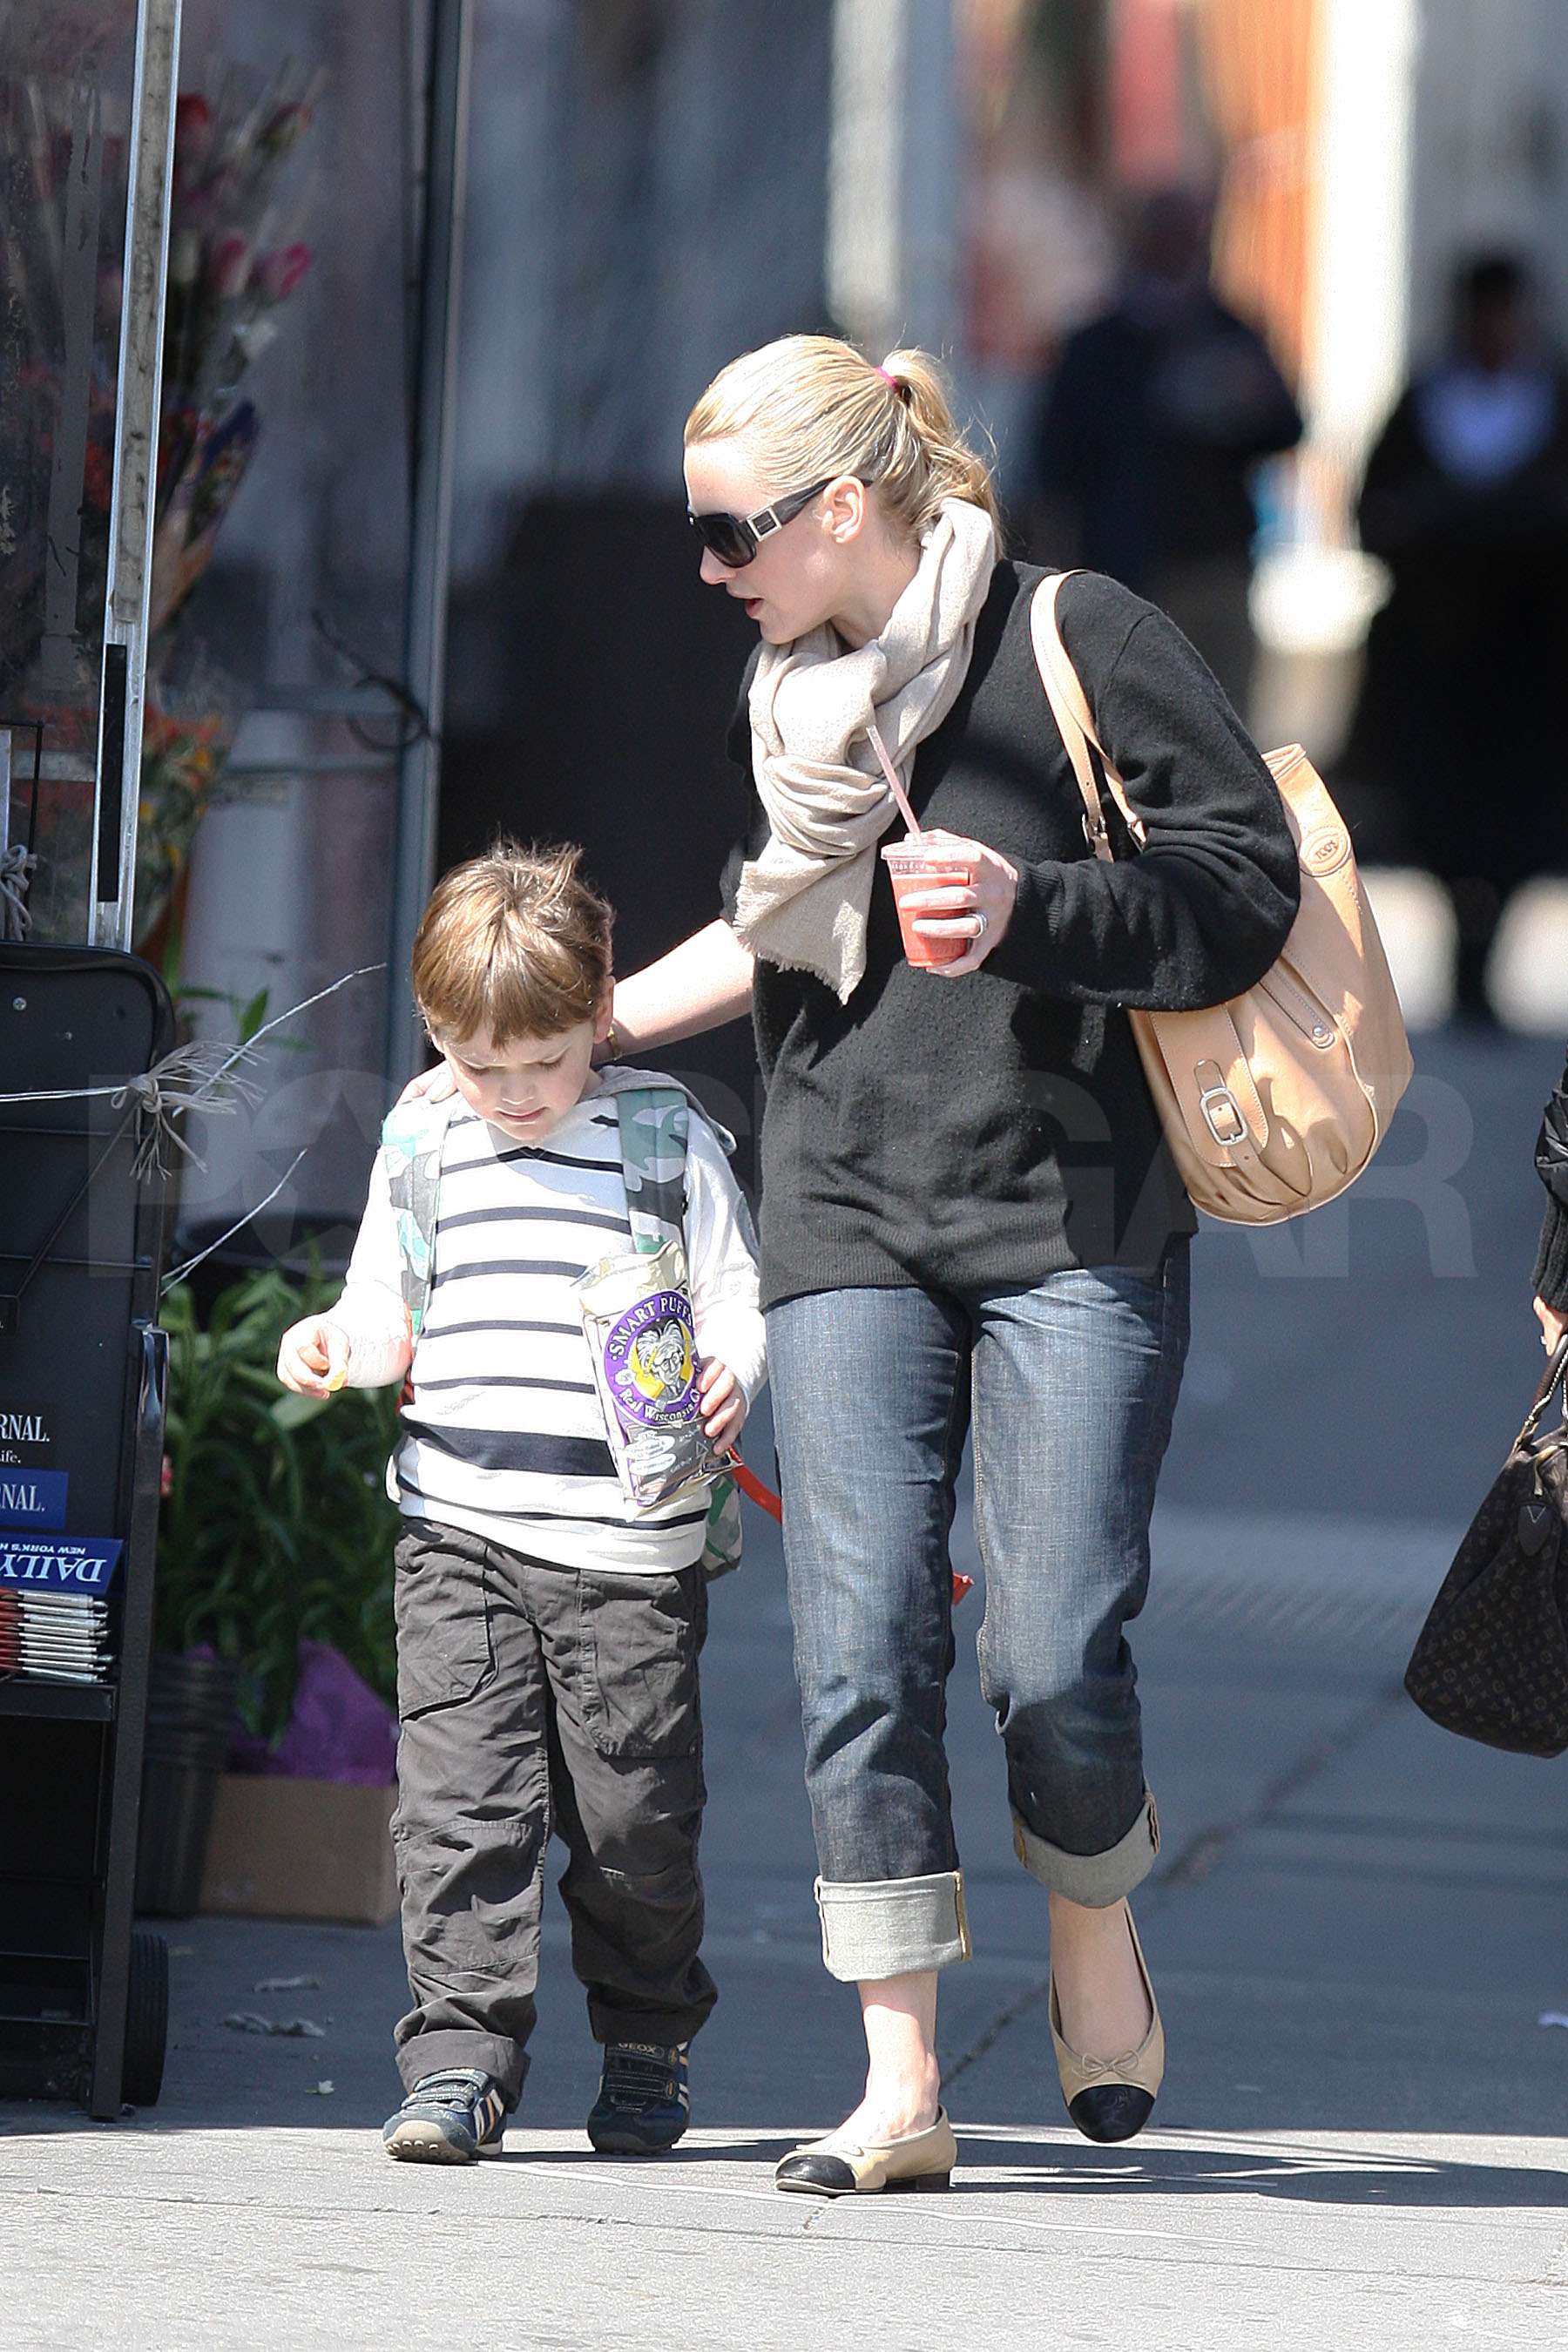 Kate Winslet walks with her son in NYC. Pictured: Kate Winslet and Joe Alfie Winslet Mendes Ref: SPL92788 090409 Picture by: St.Clair / Winslow / Splash News Splash News and Pictures Los Angeles: 310-821-2666 New York: 212-619-2666 London: 870-934-2666 photodesk@splashnews.com 